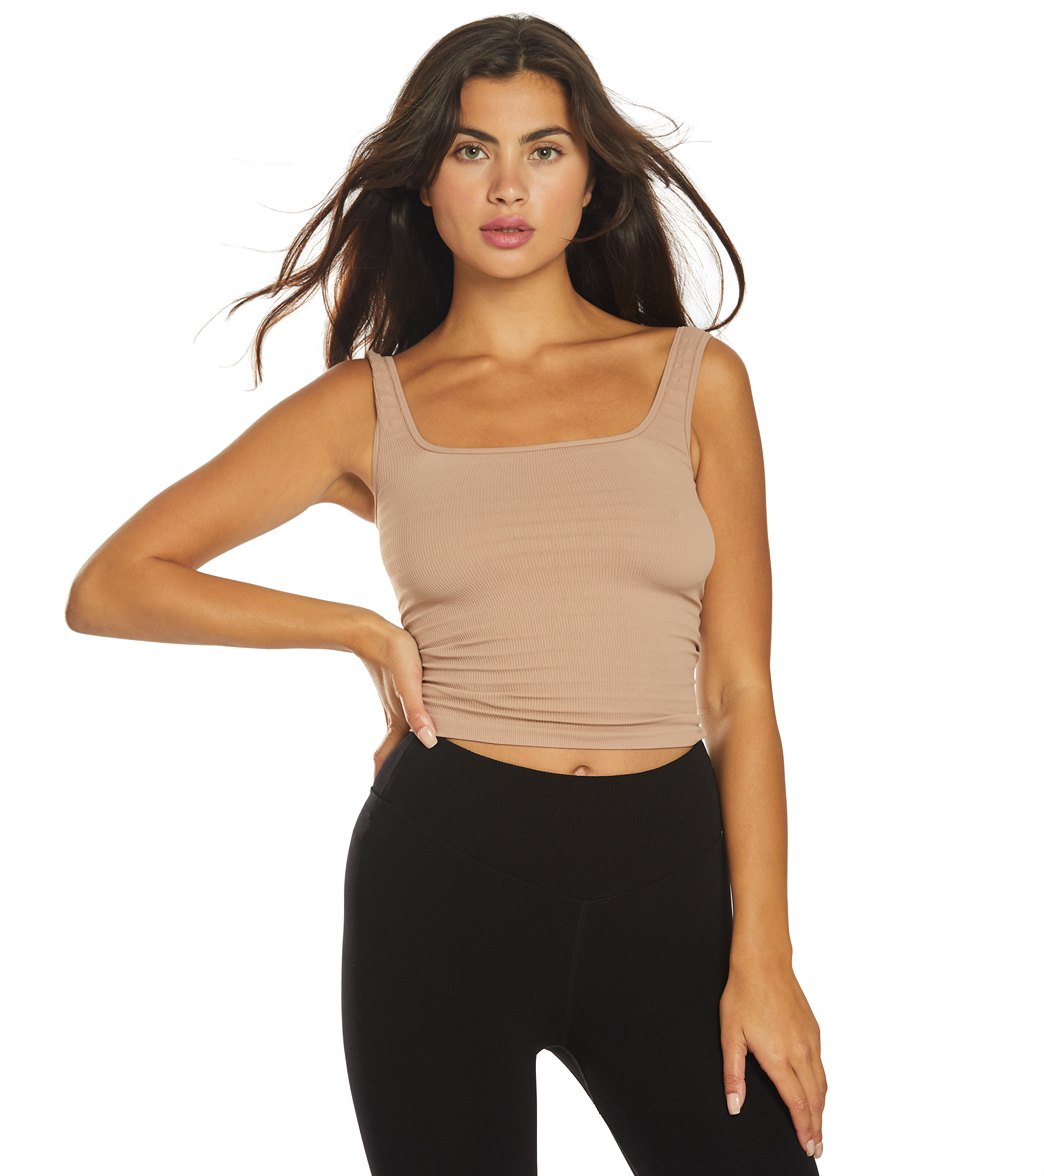 Free People Women's Square One Seamless Cami - Nude - X-Small/Small Spandex Top